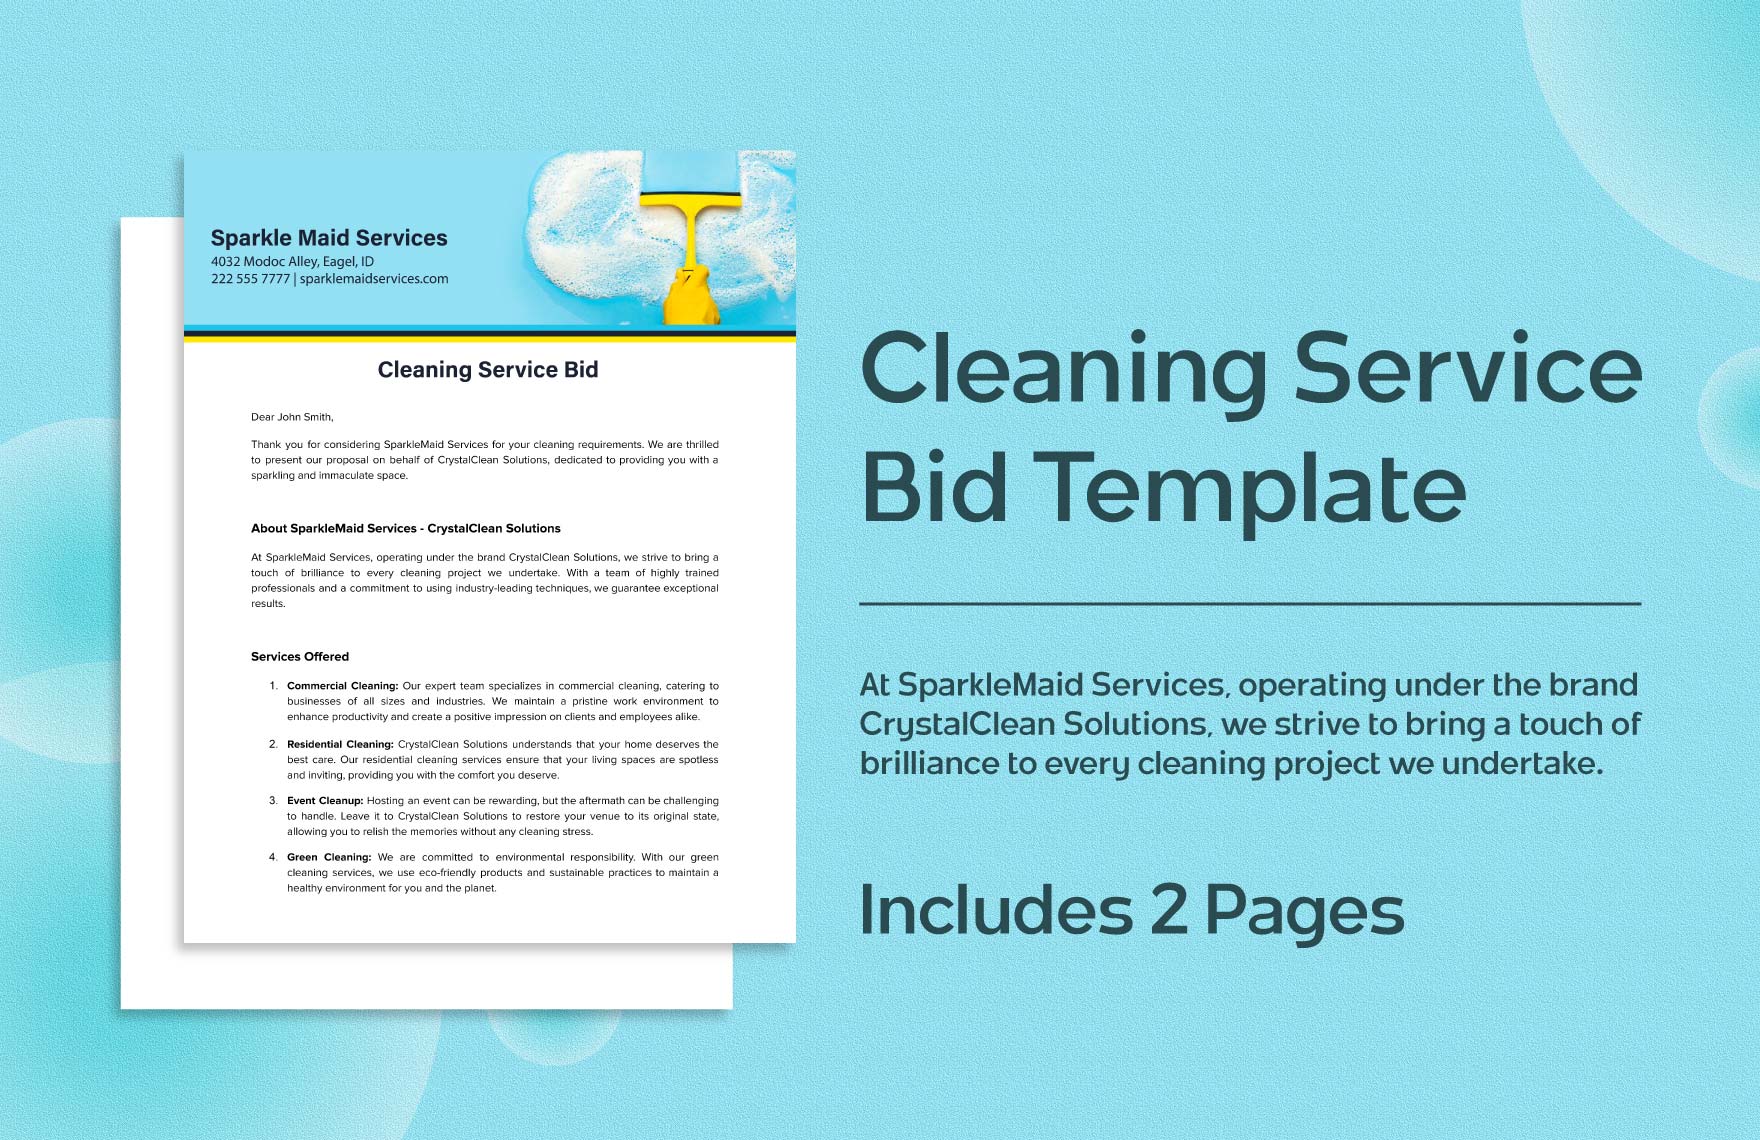 Cleaning Service Bid Template in Word, Google Docs, PDF